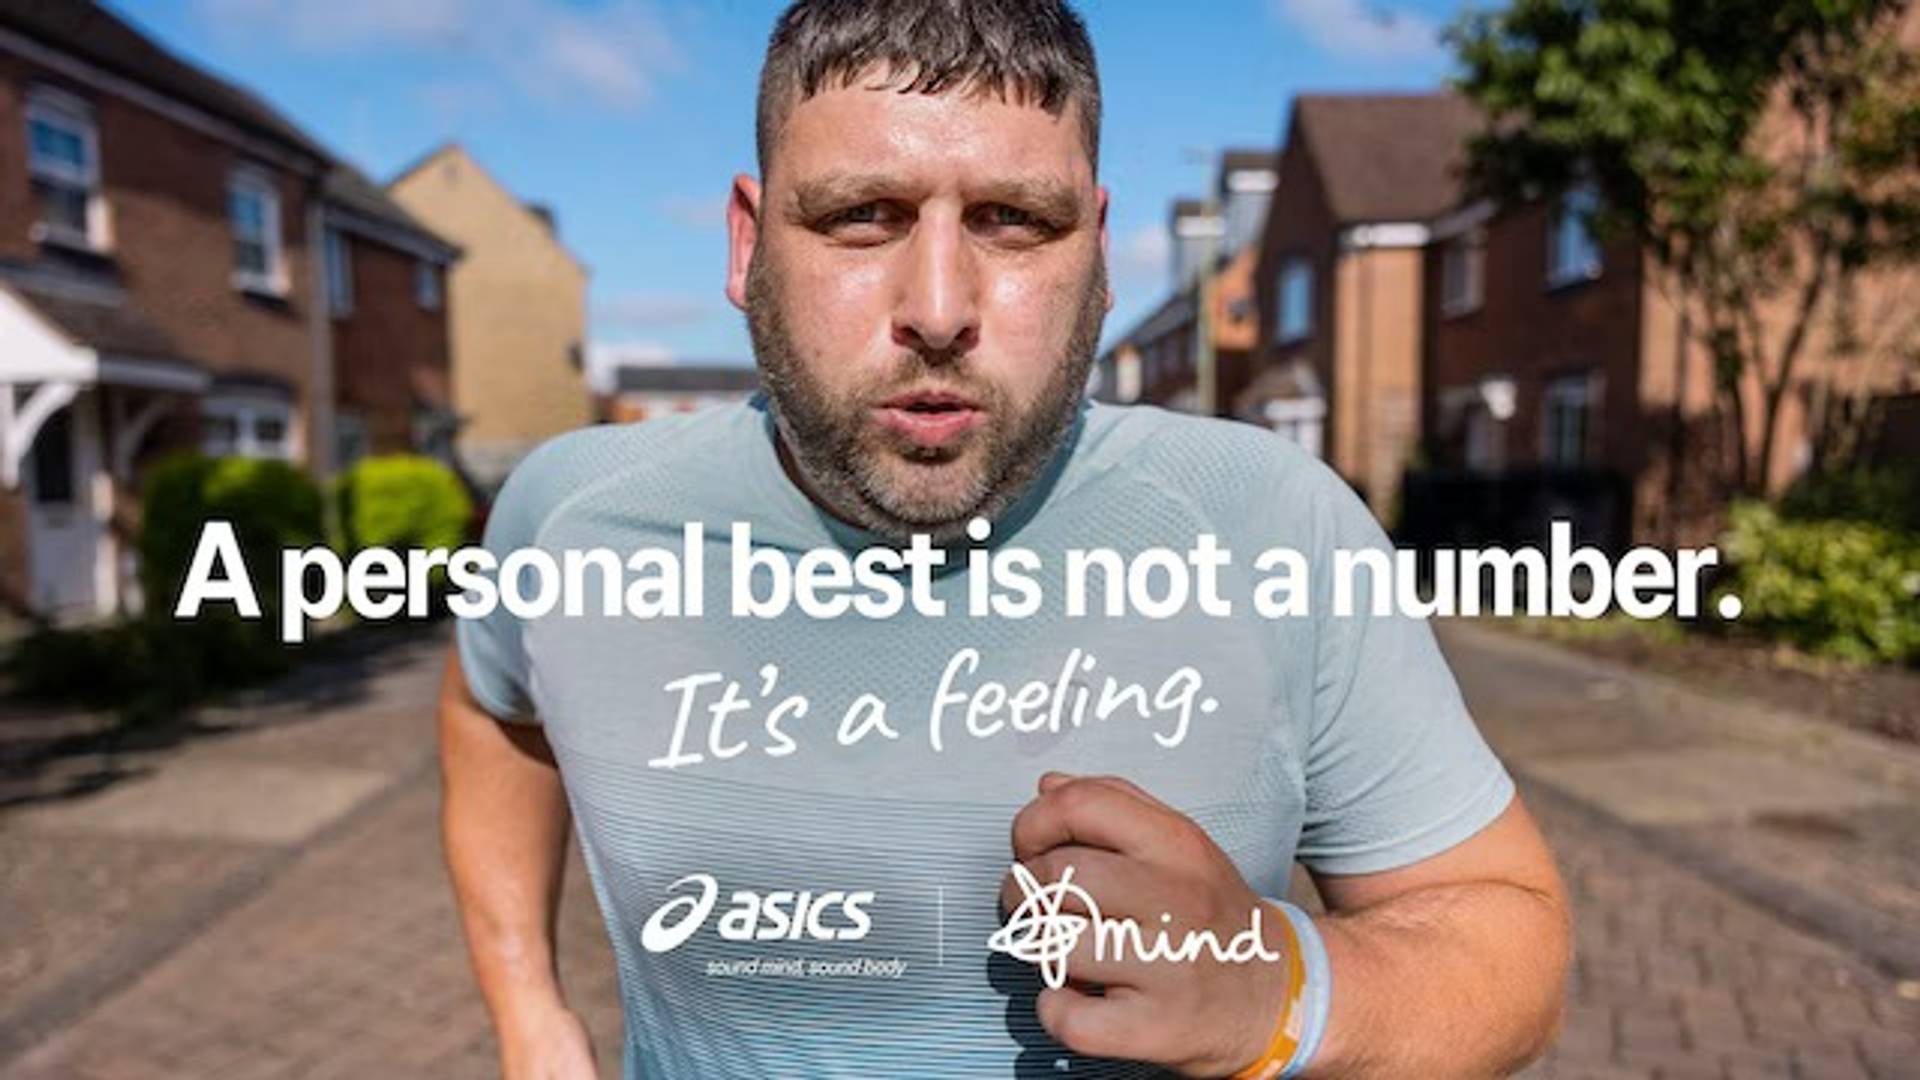 Asics campaign calls out intimidating exercise culture